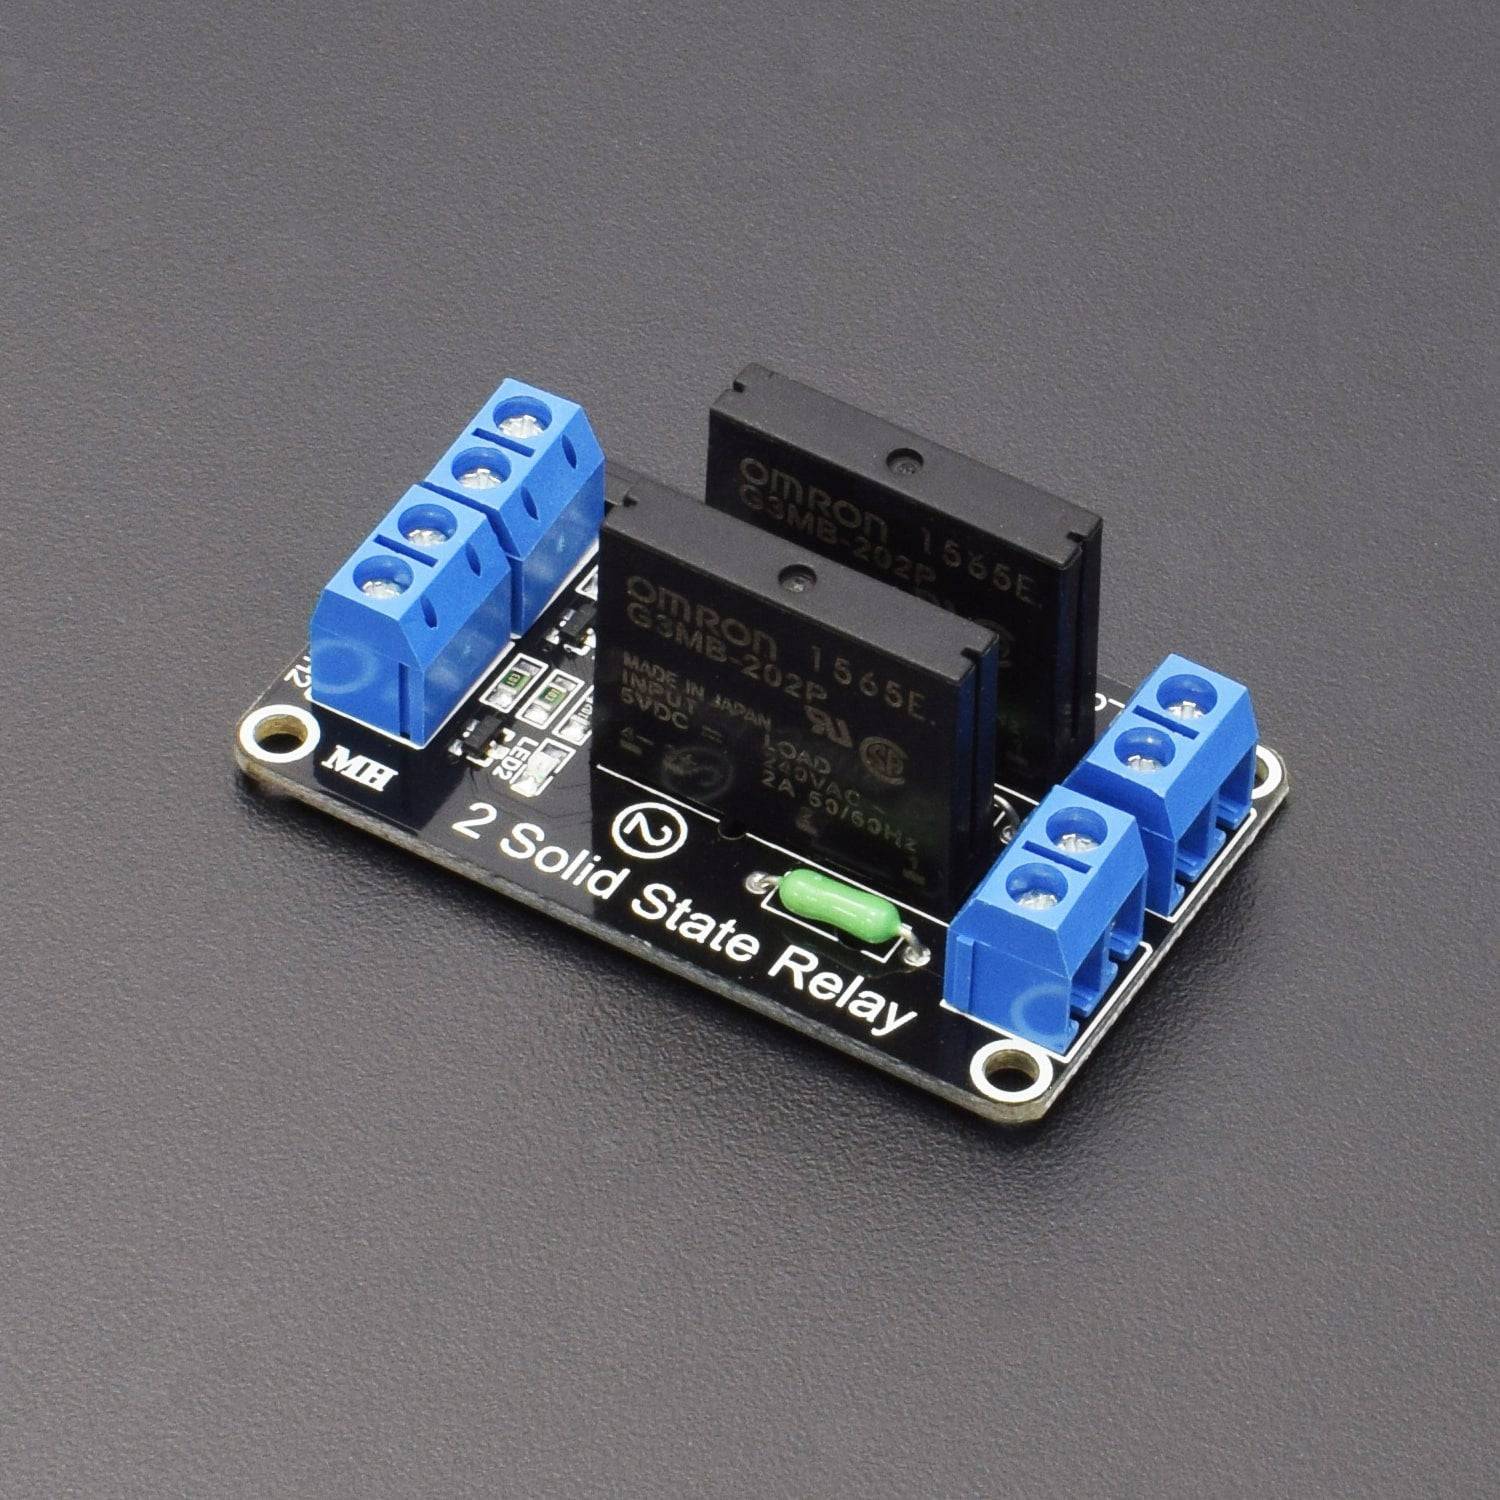 5V 2 Channel G3MB-202P Solid State Relay Module 240V 2A Output with Resistive Fuse - NA168 - REES52